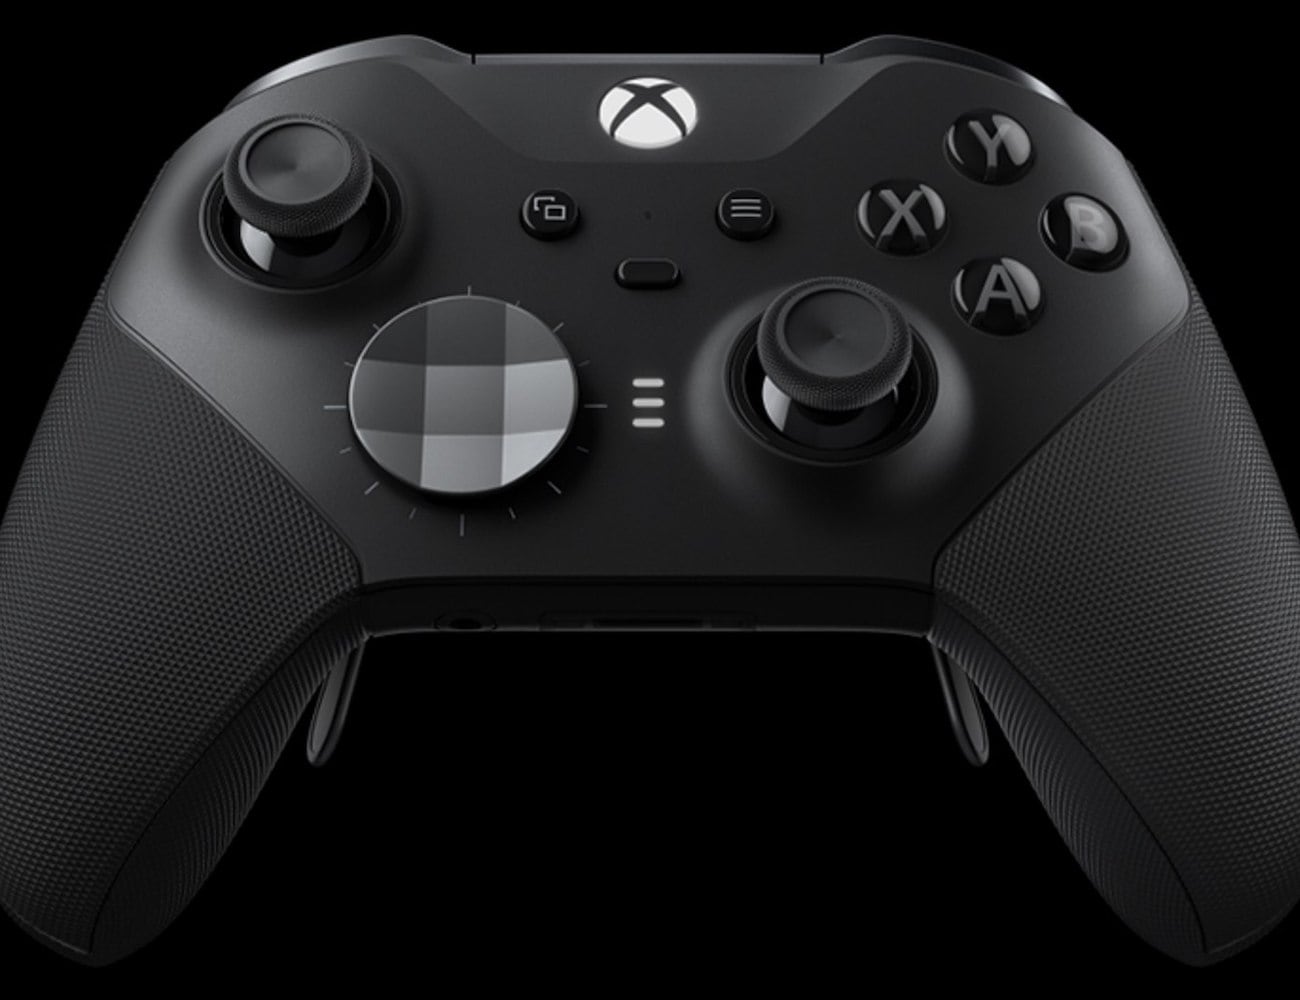 Microsoft Xbox Elite Wireless Controller Series 2 Customizable Gaming Controller lets you game like a professional